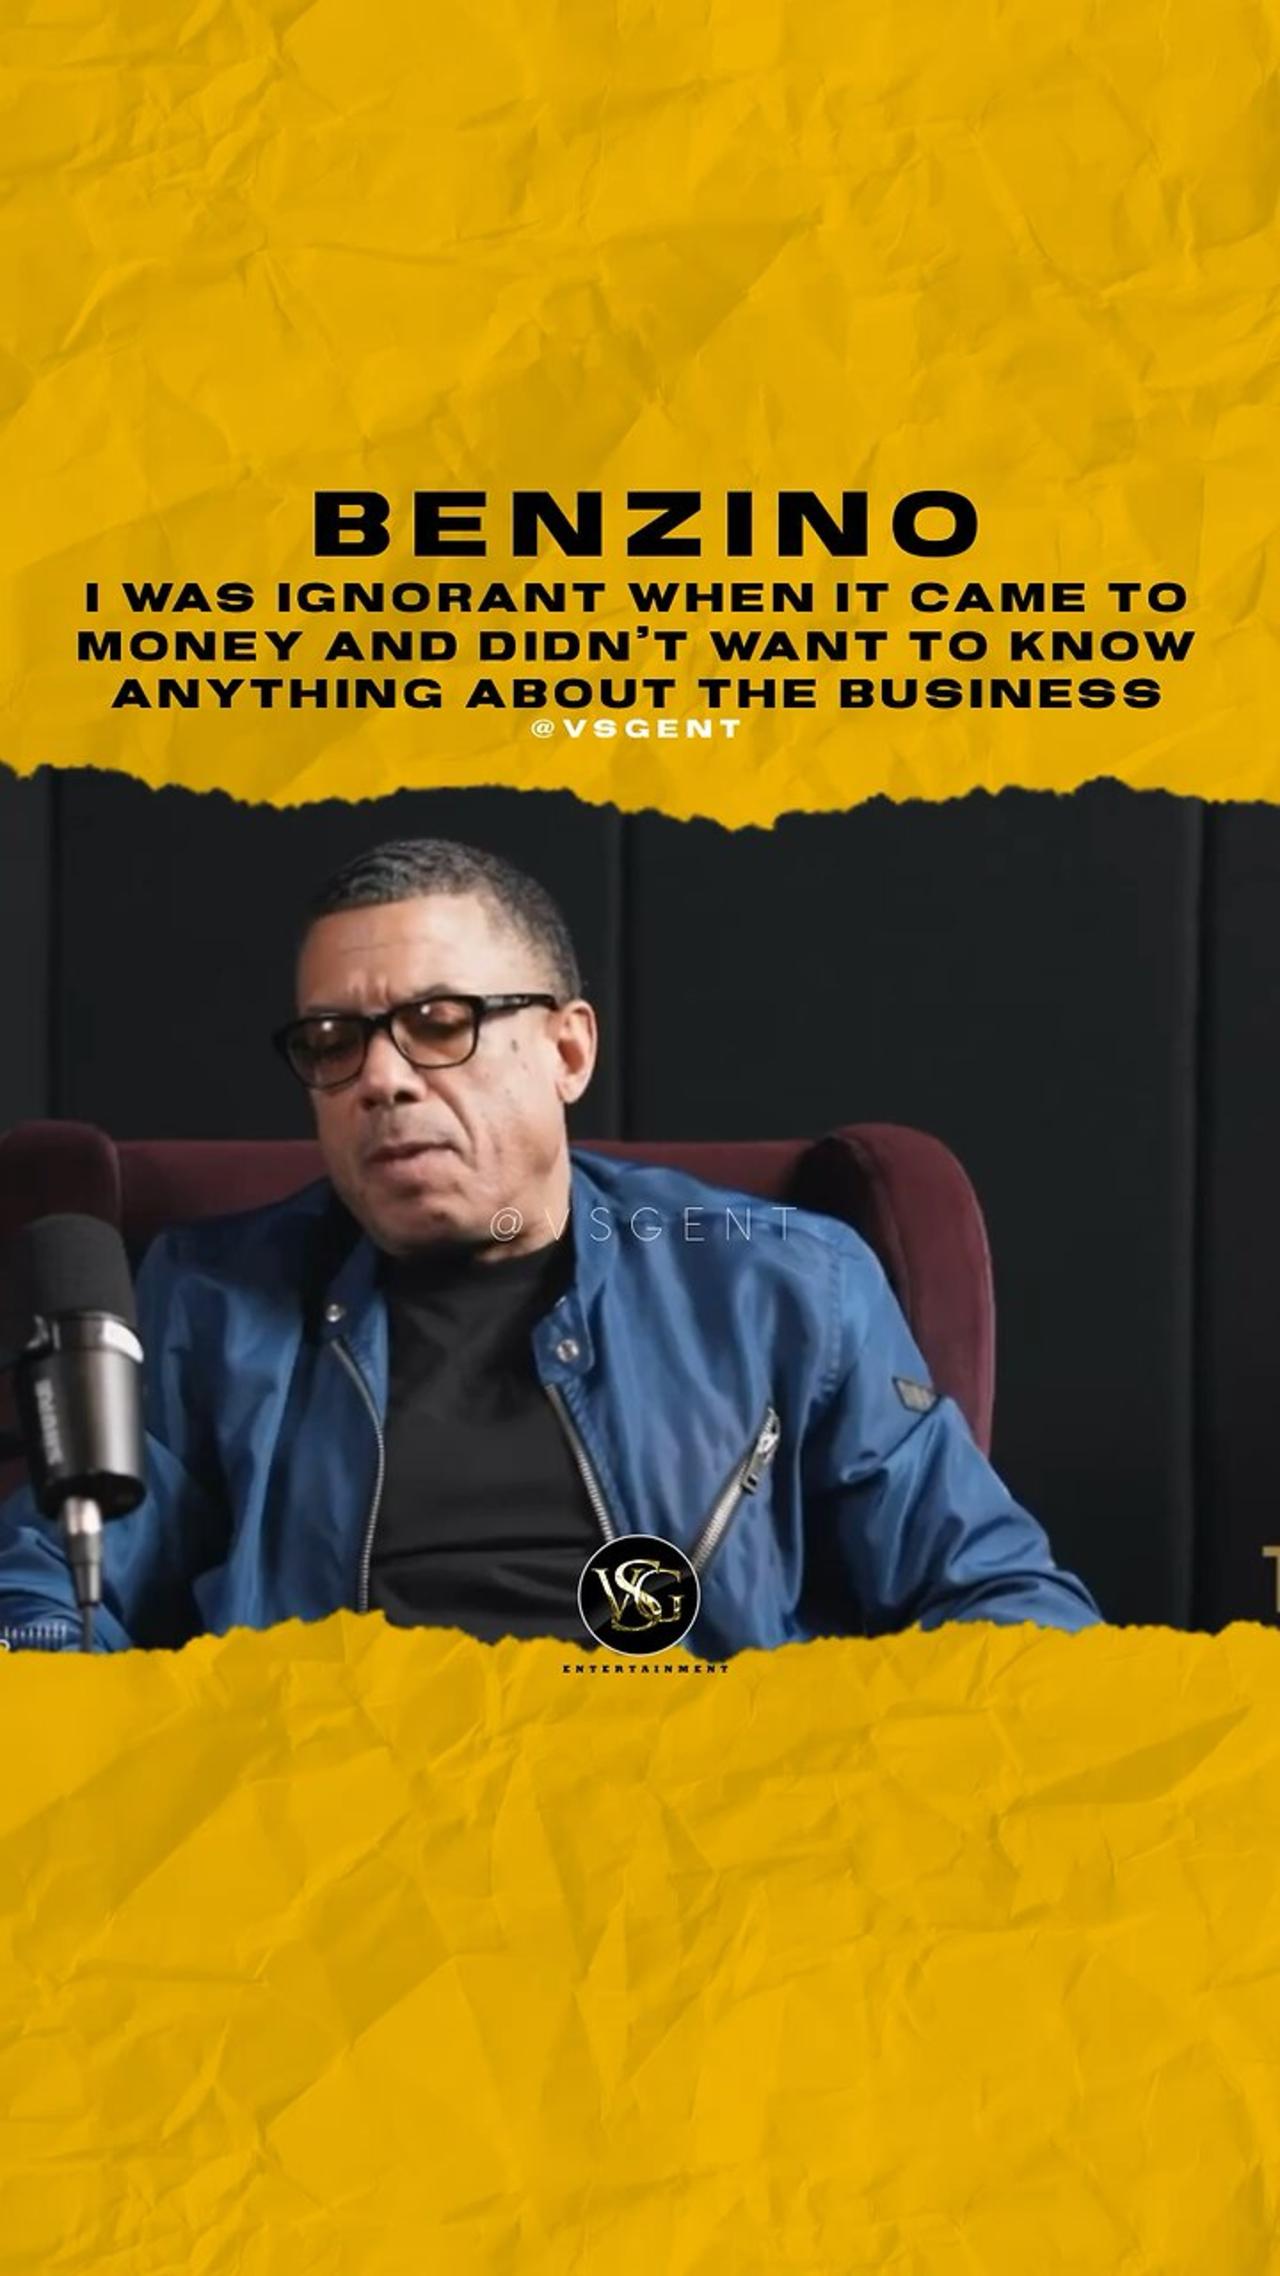 #benzino I was ignorant when it came 2 💰 & didn’t want to know about the business. 🎥 @tonythecloser_